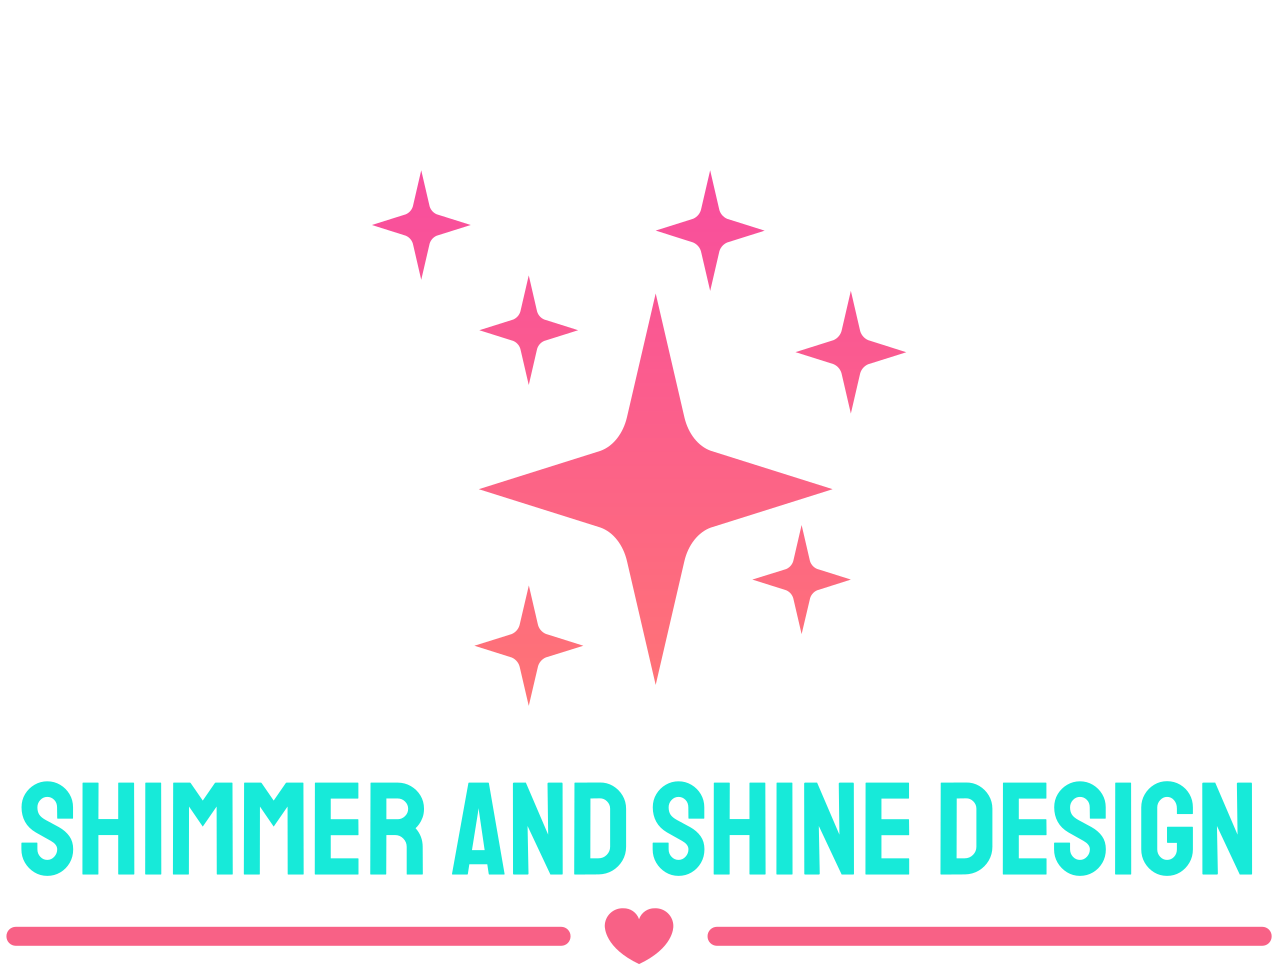 Shimmer and Shine Design's web page